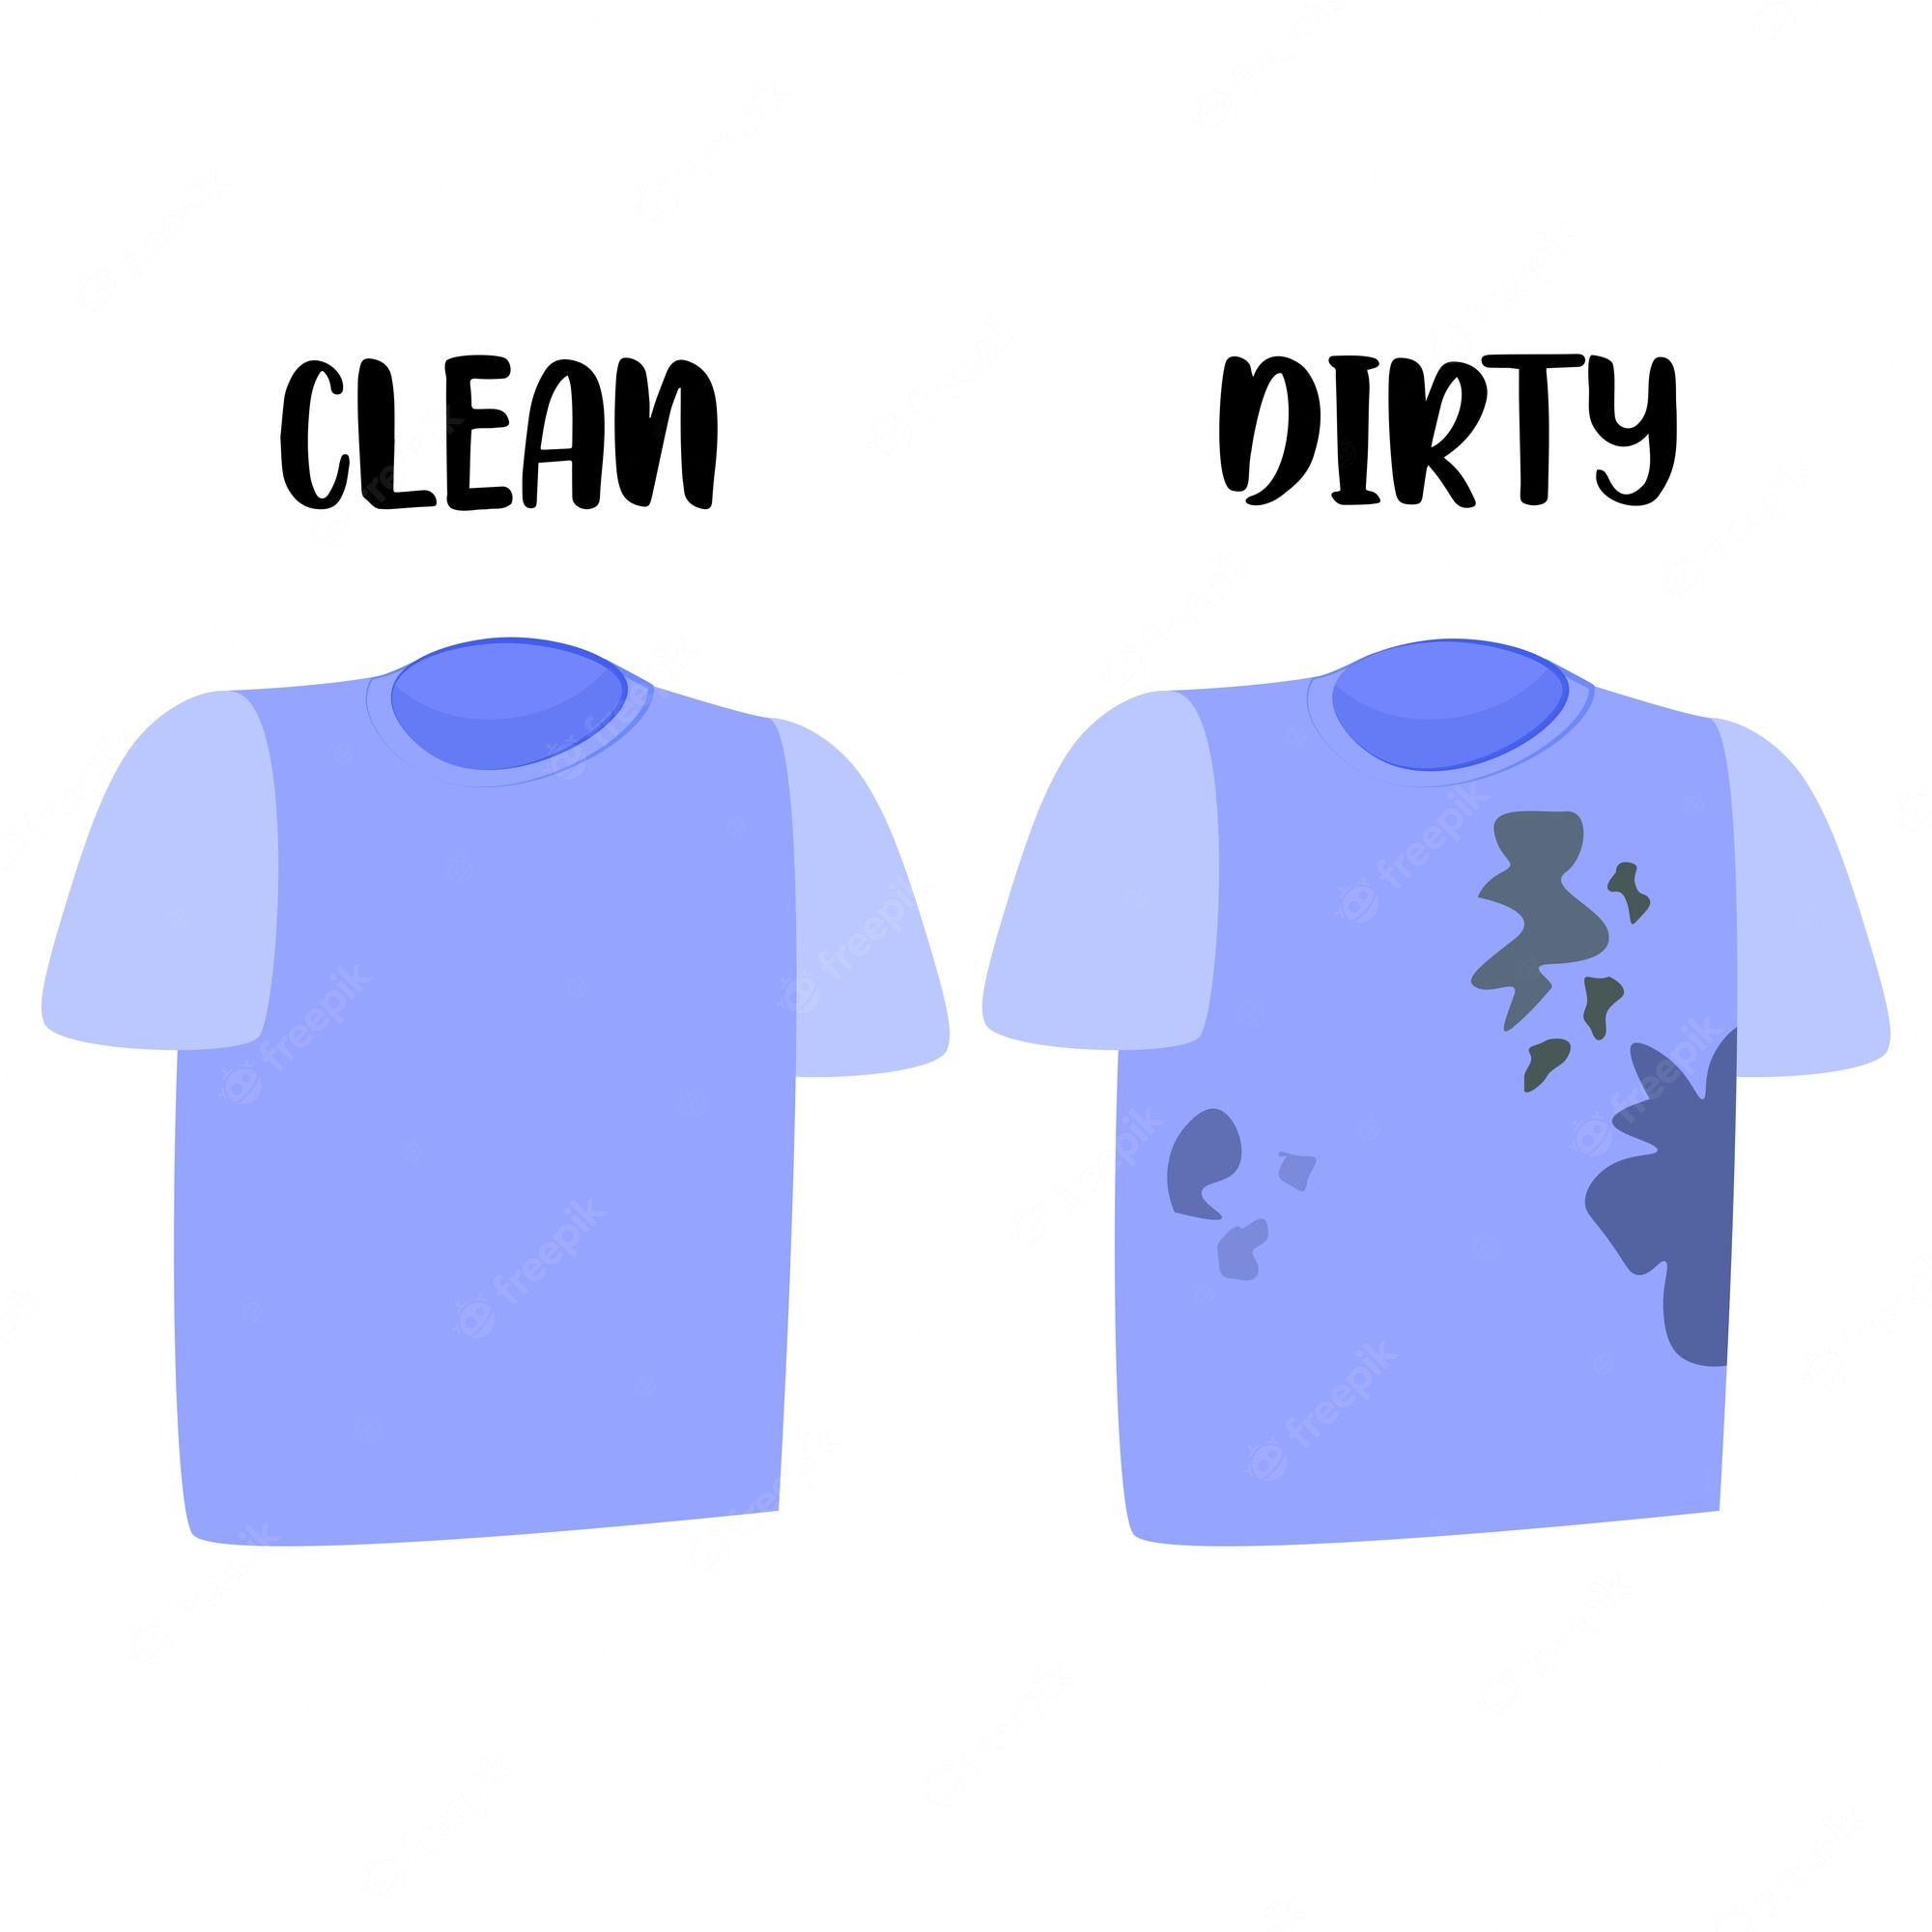 dirty shirt clipart black and white - Clip Art Library - Clip Art Library